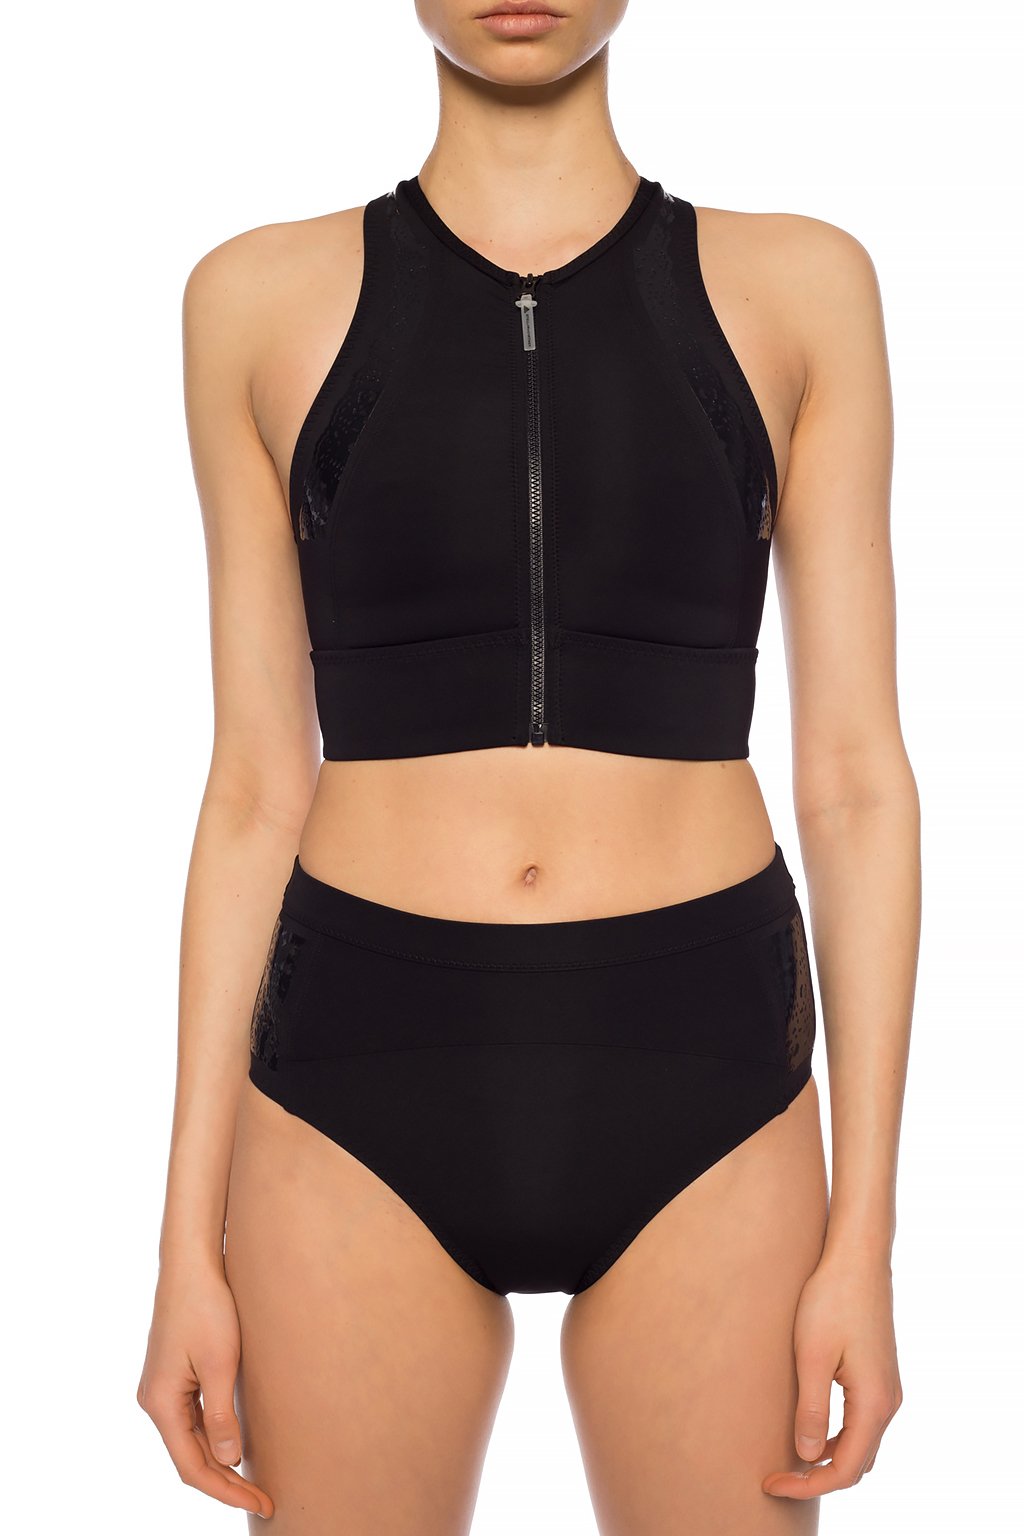 ADIDAS by Stella Swimsuit top | Women's Clothing |